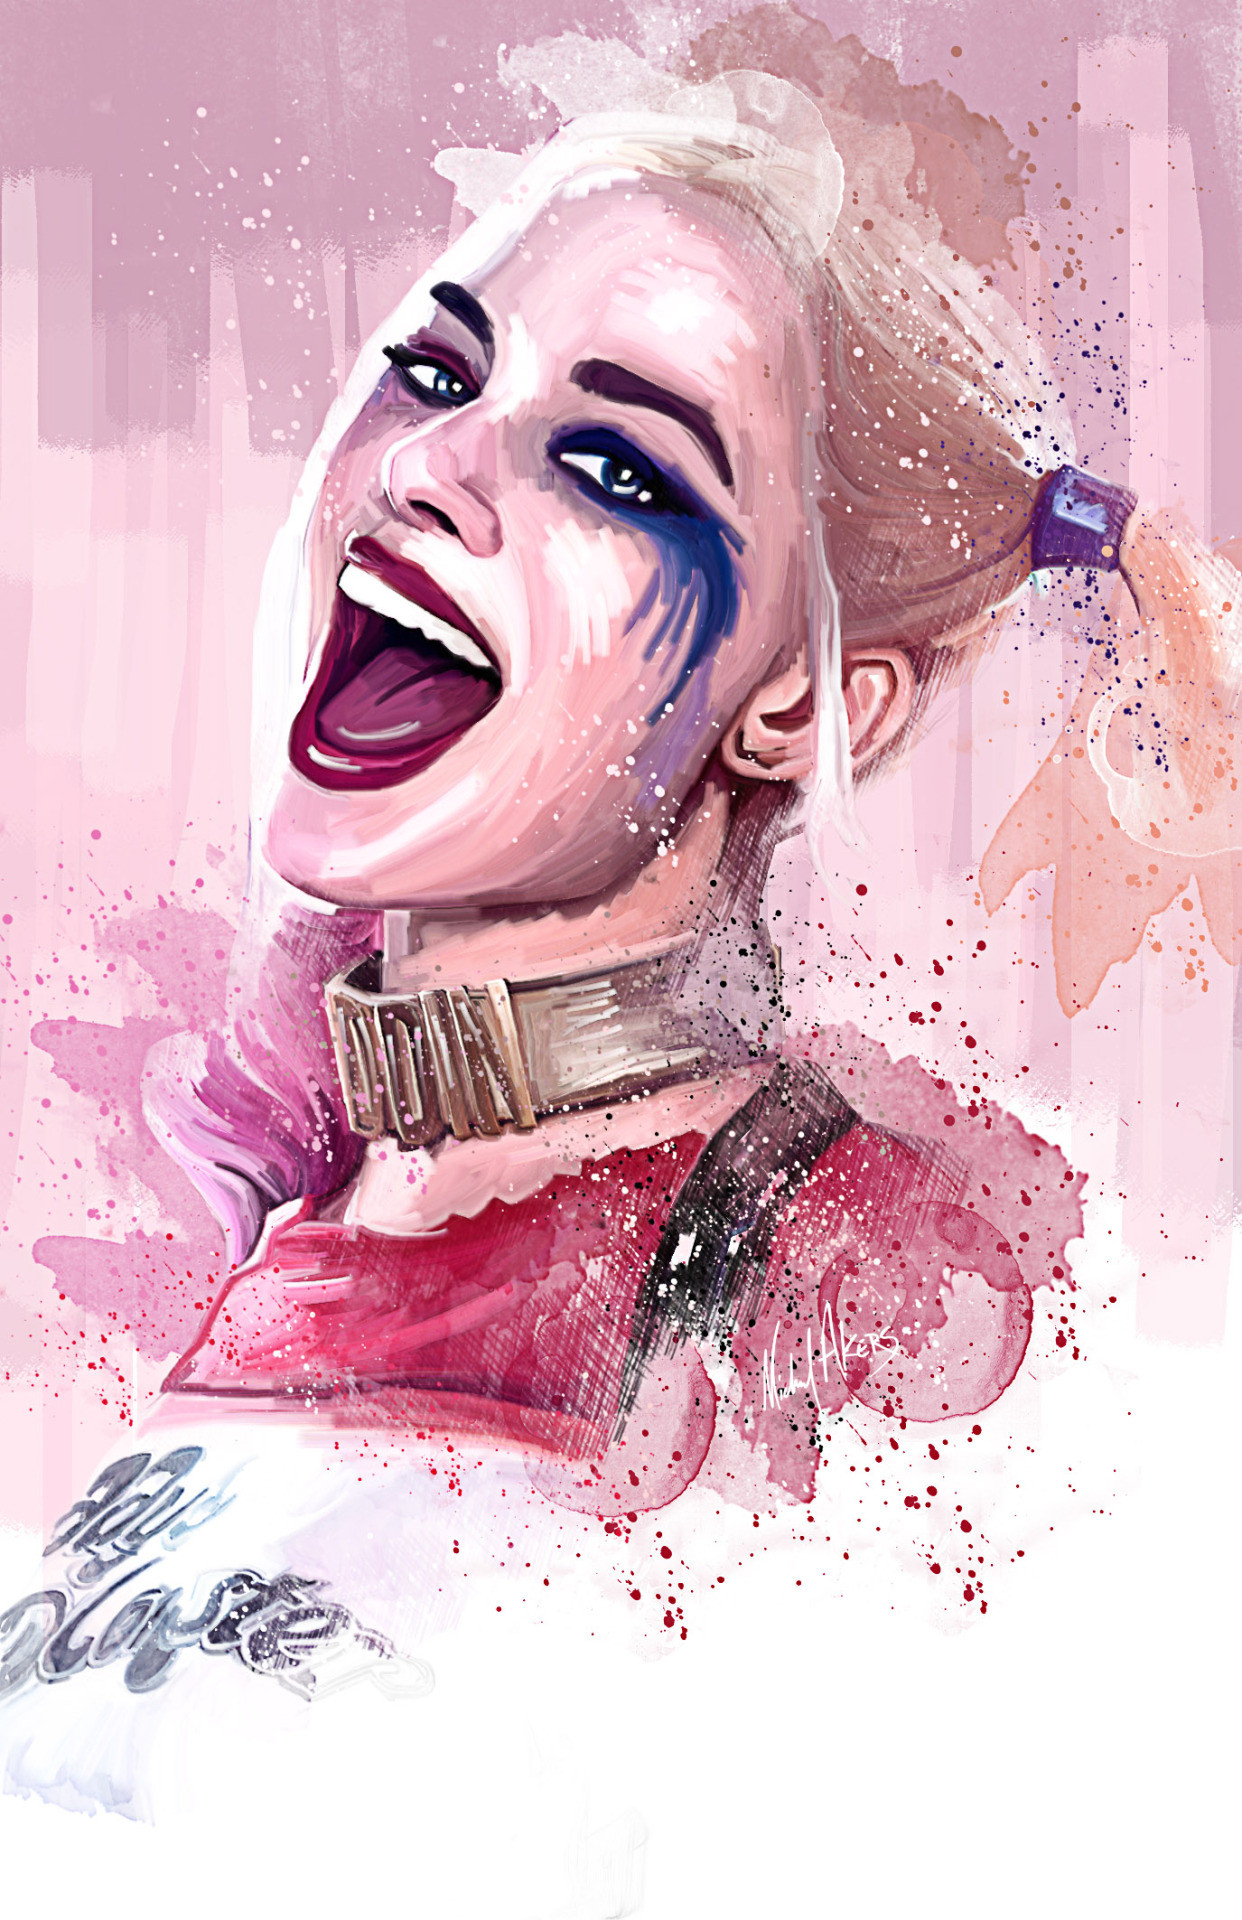 1242x1920 Margot Robbie as Harley Quinn from Suicide Squad.. I can't wait for